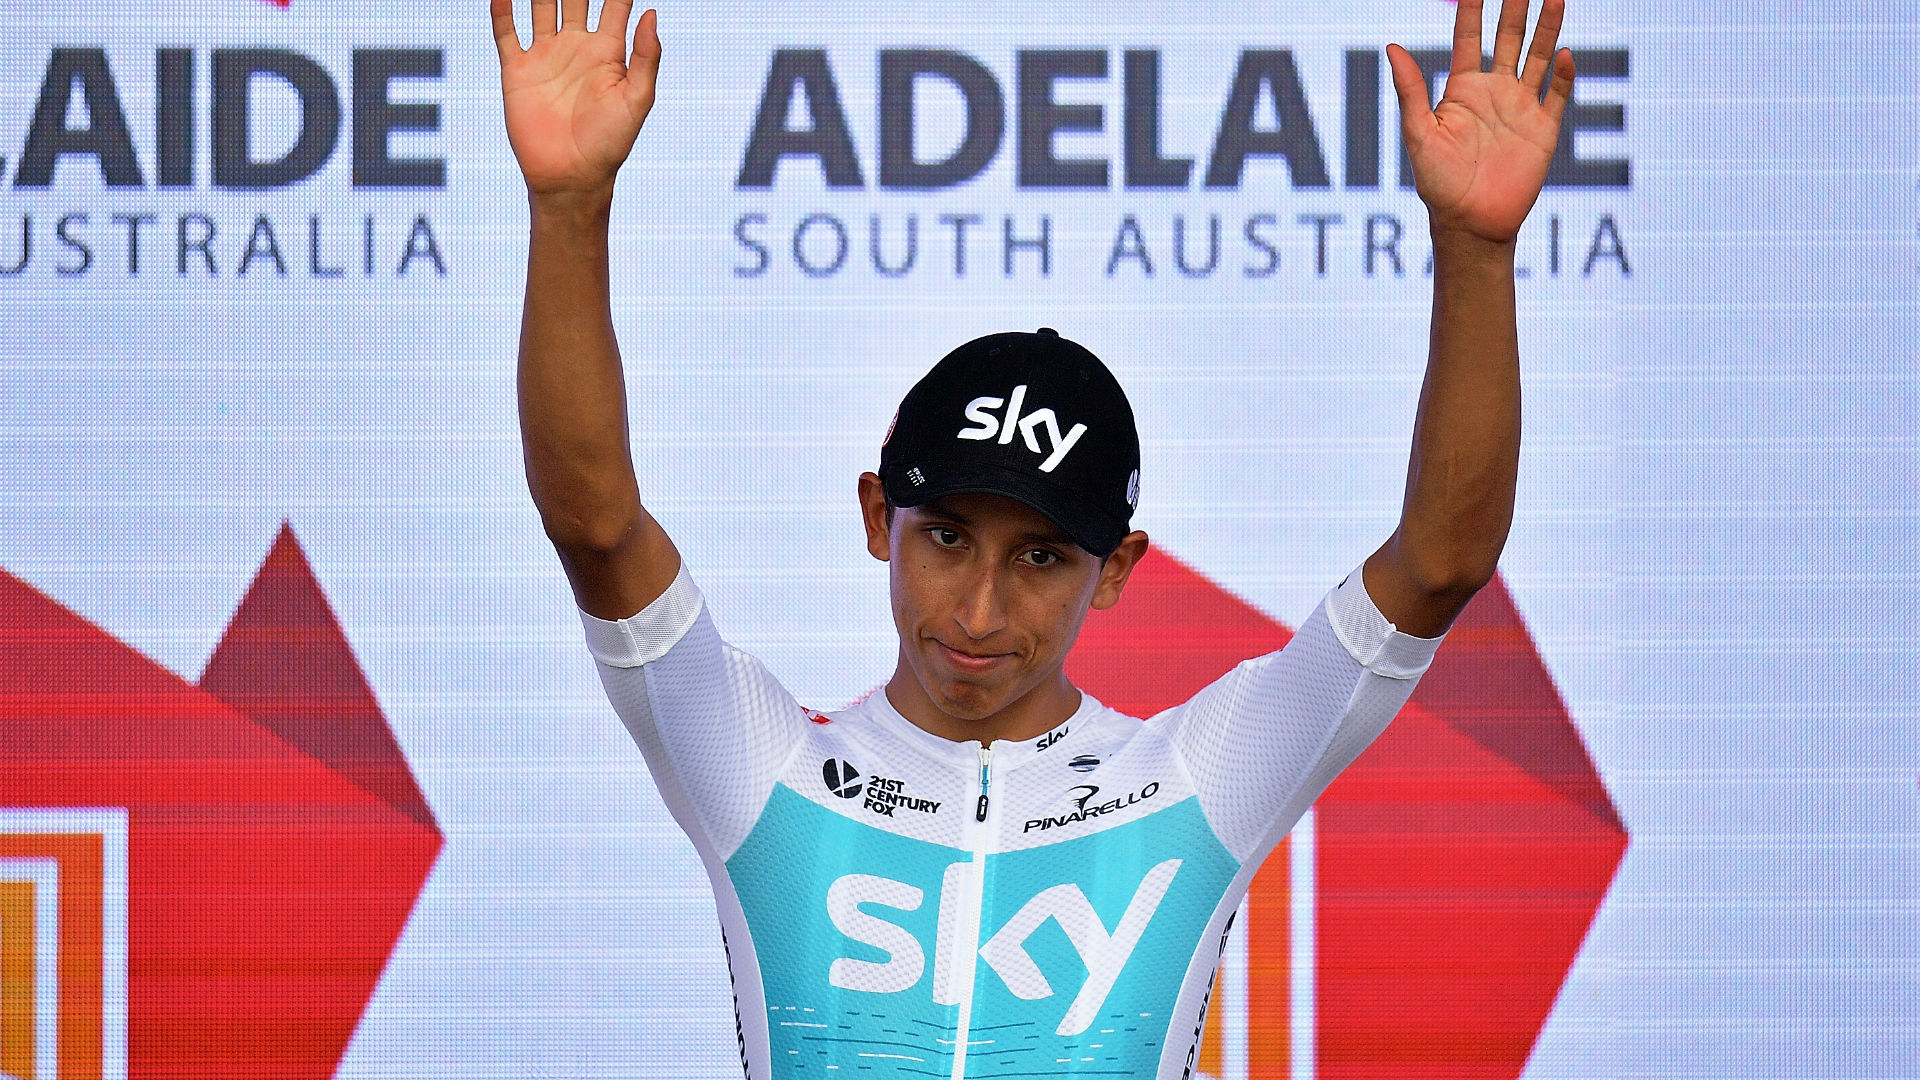 Third at the first rest day, Egan Bernal can win the Tour de France and dominate Grand Tours. That is Gianni Savio's opinion.